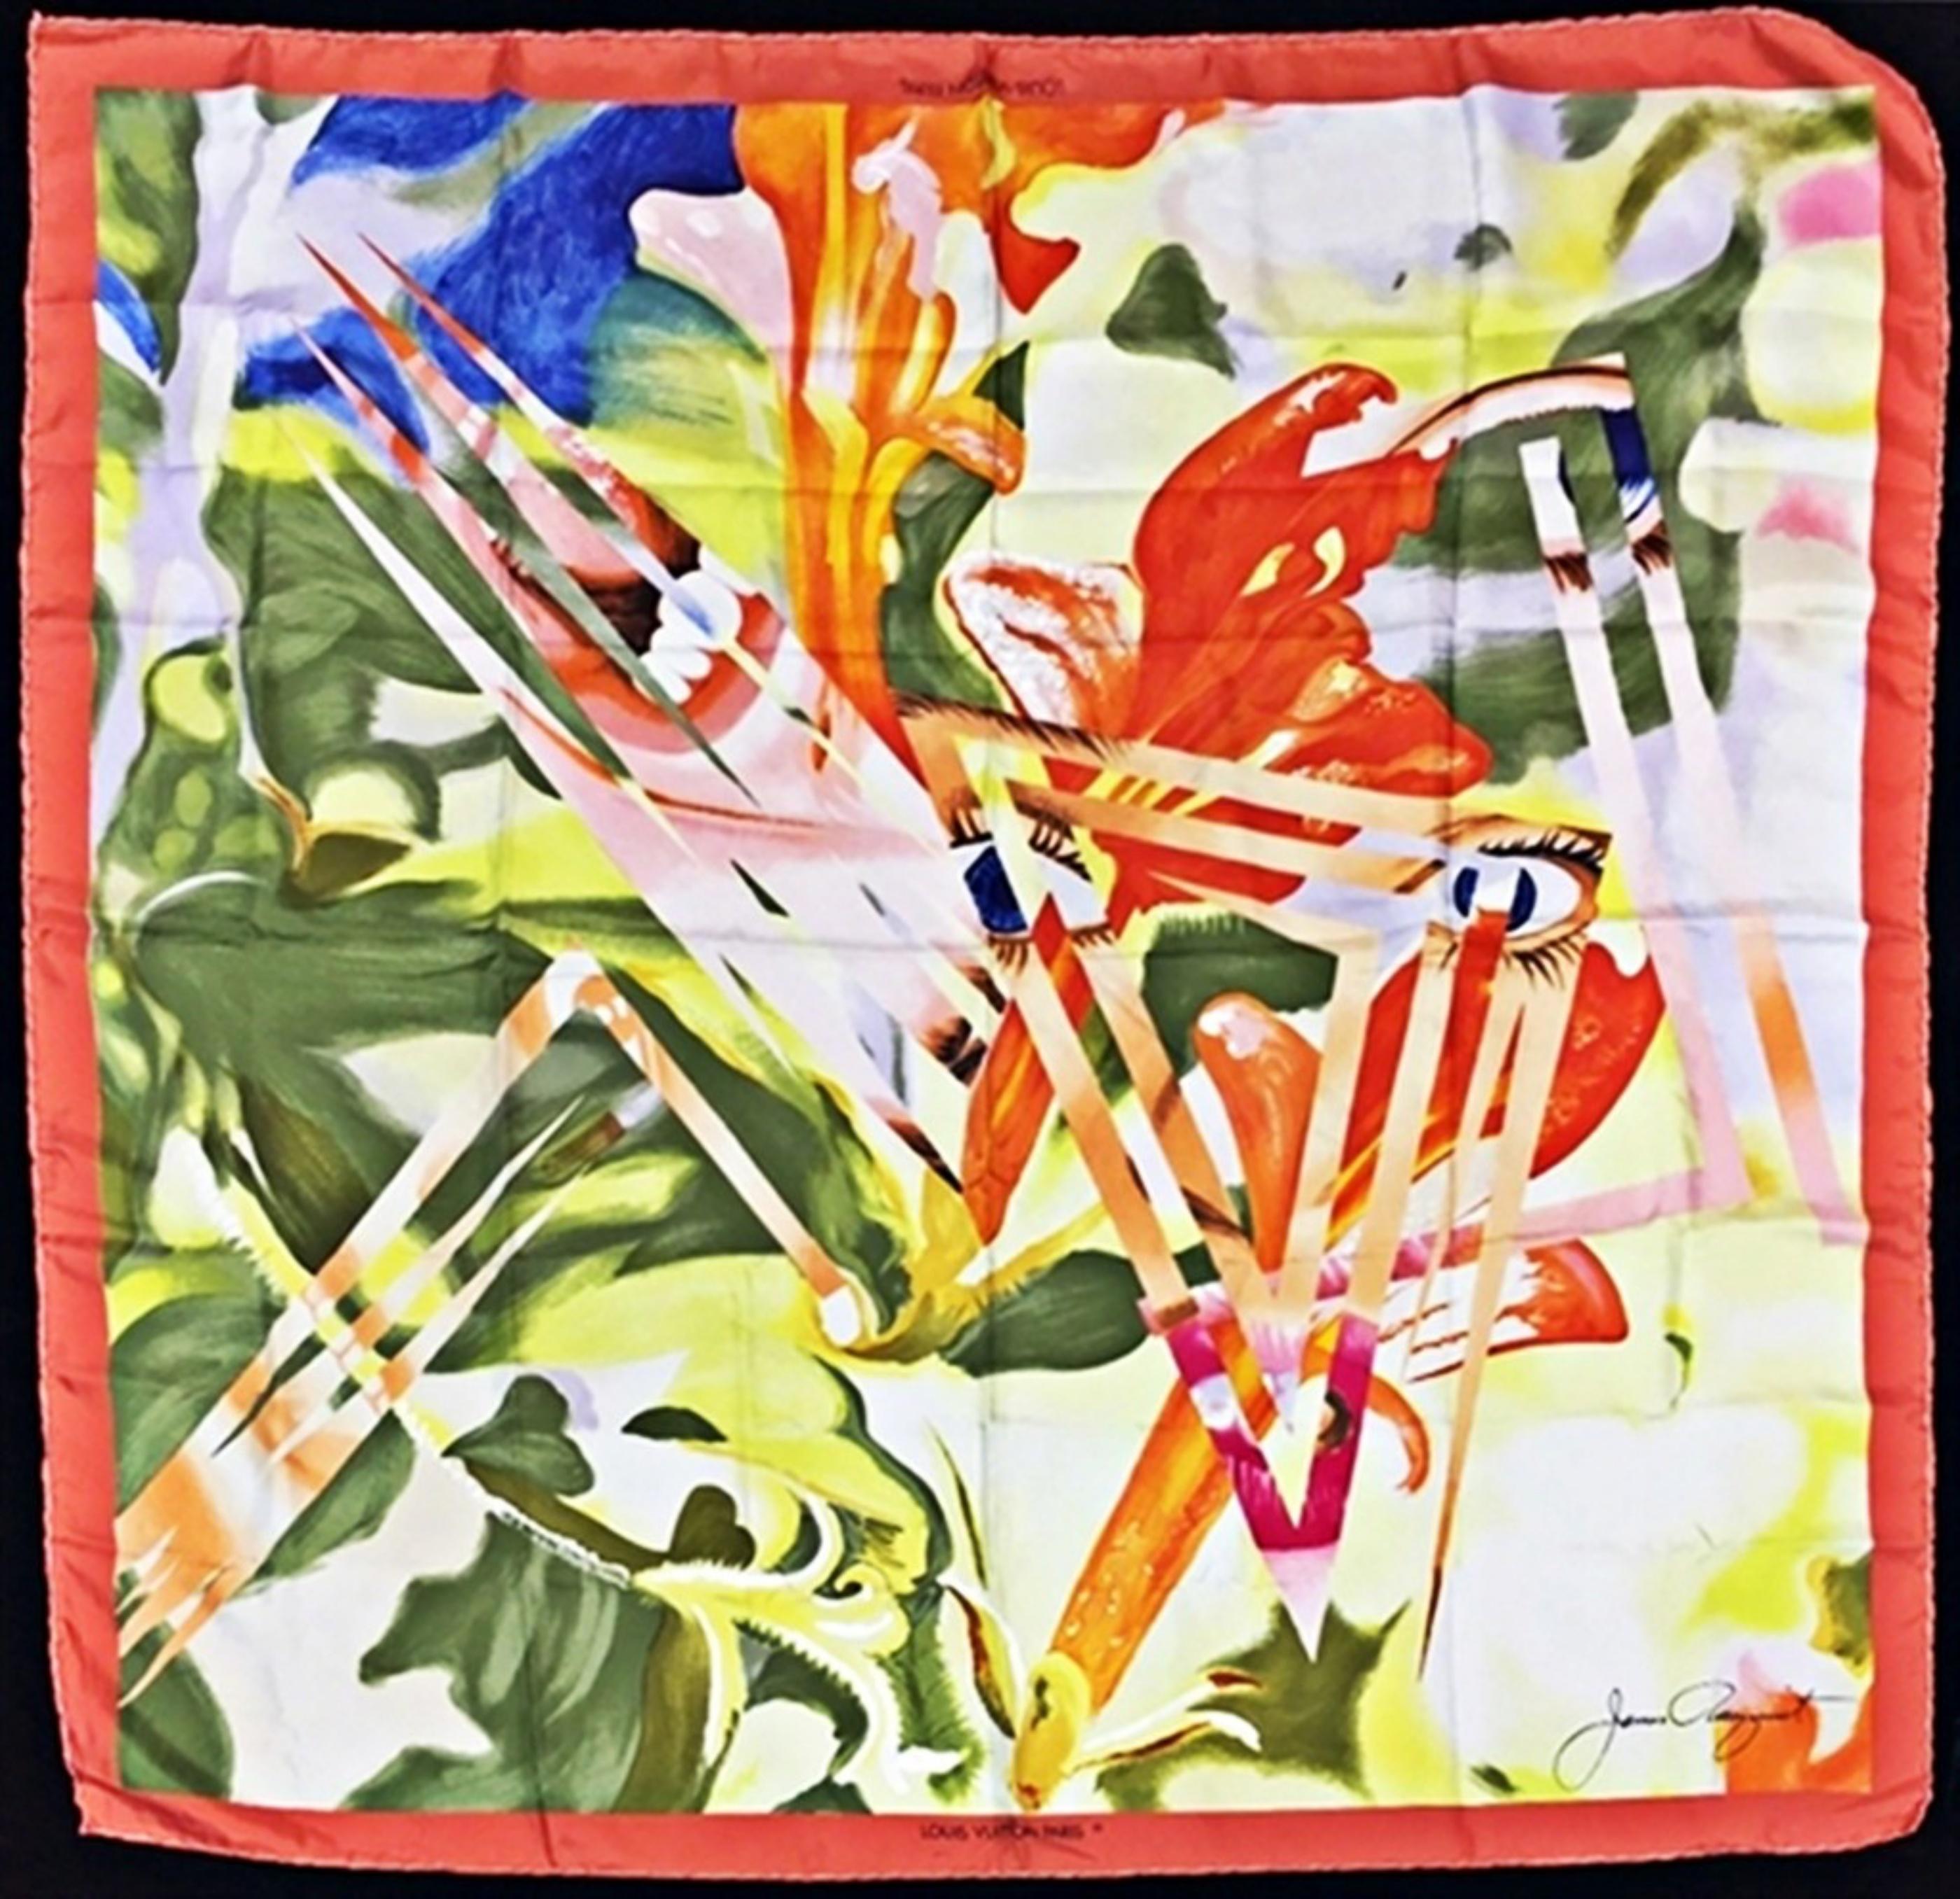  Louis Vuitton Limited Edition Silk Scarf designed by James Rosenquist For Sale 4